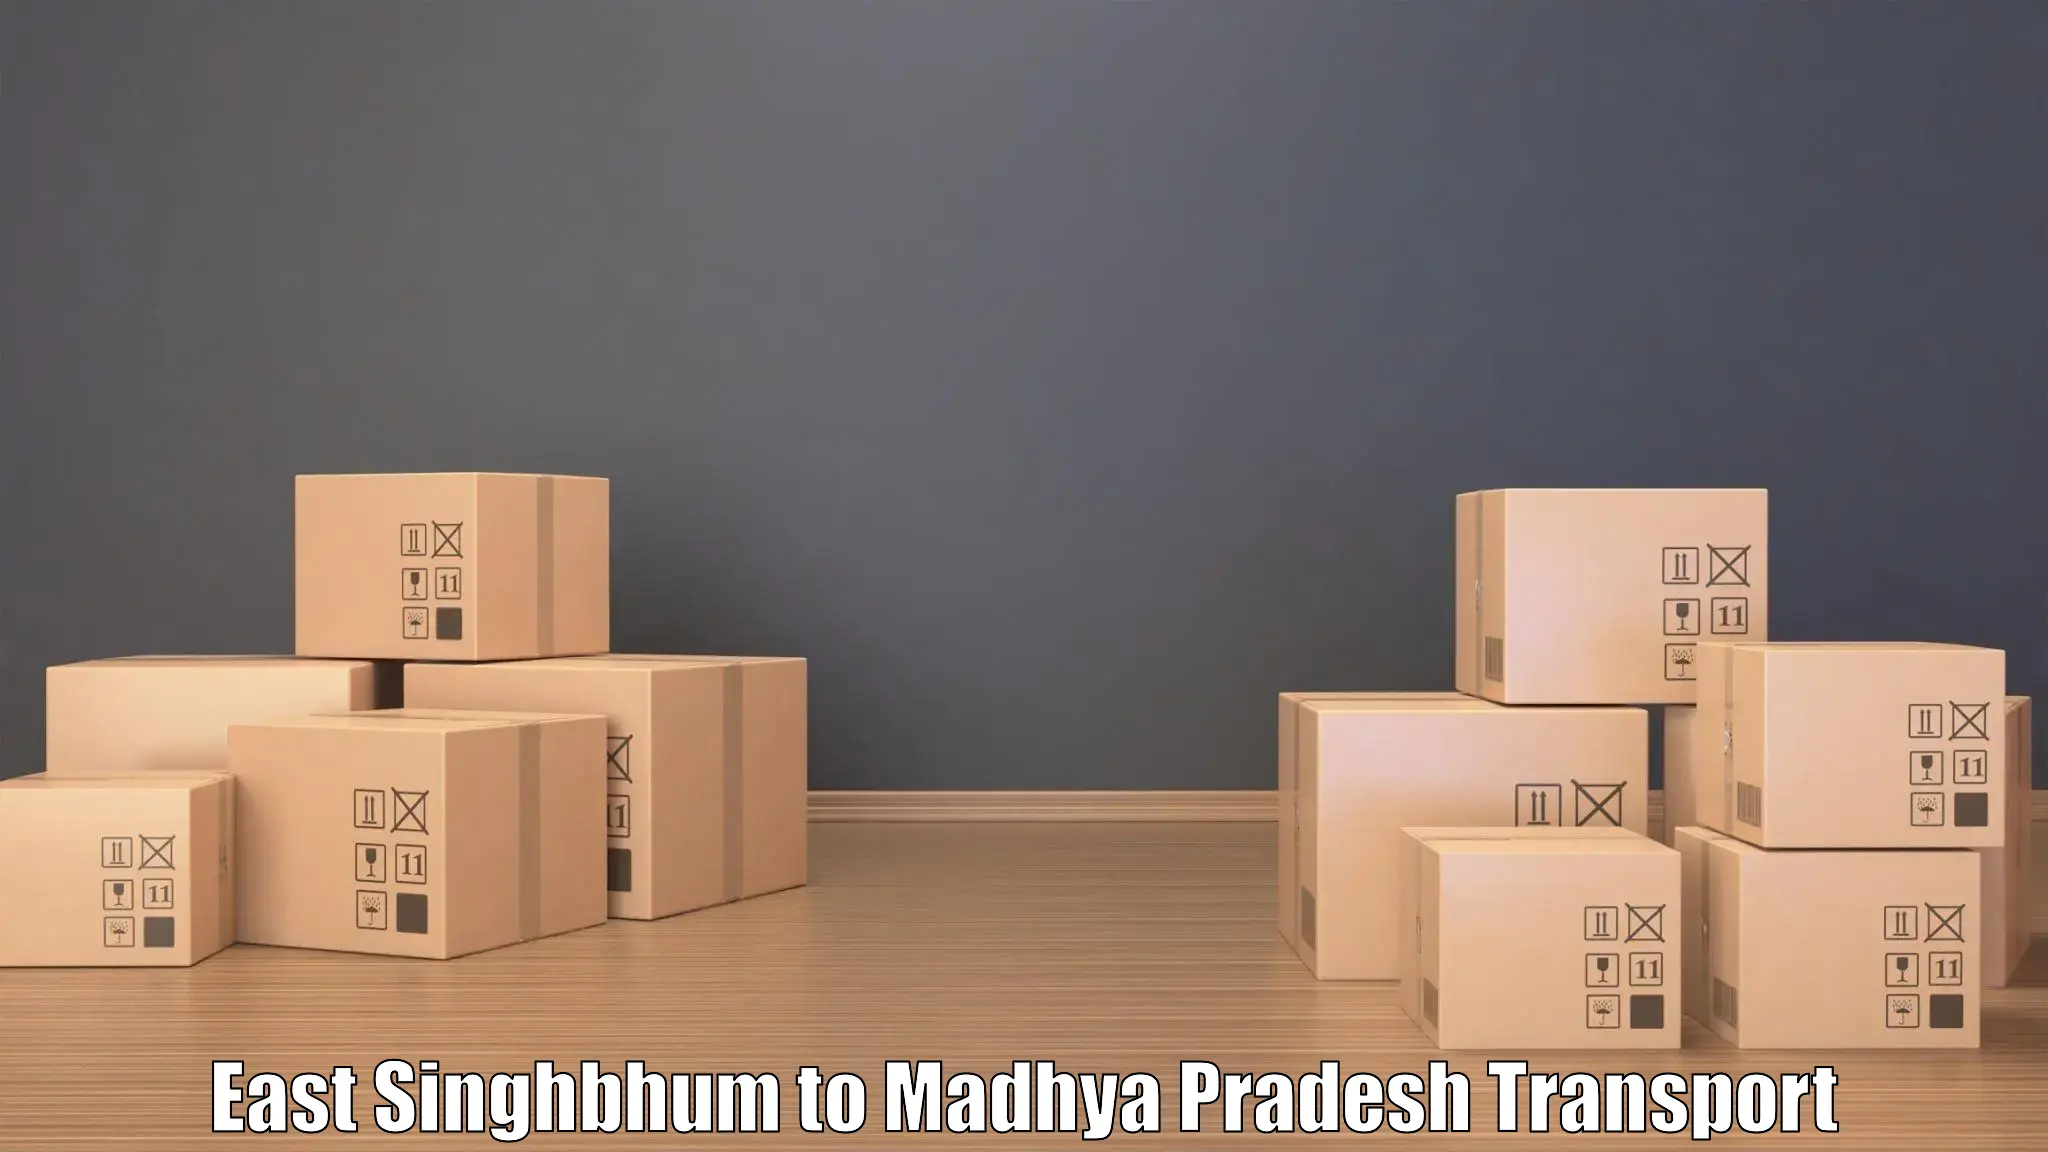 Material transport services East Singhbhum to Harda